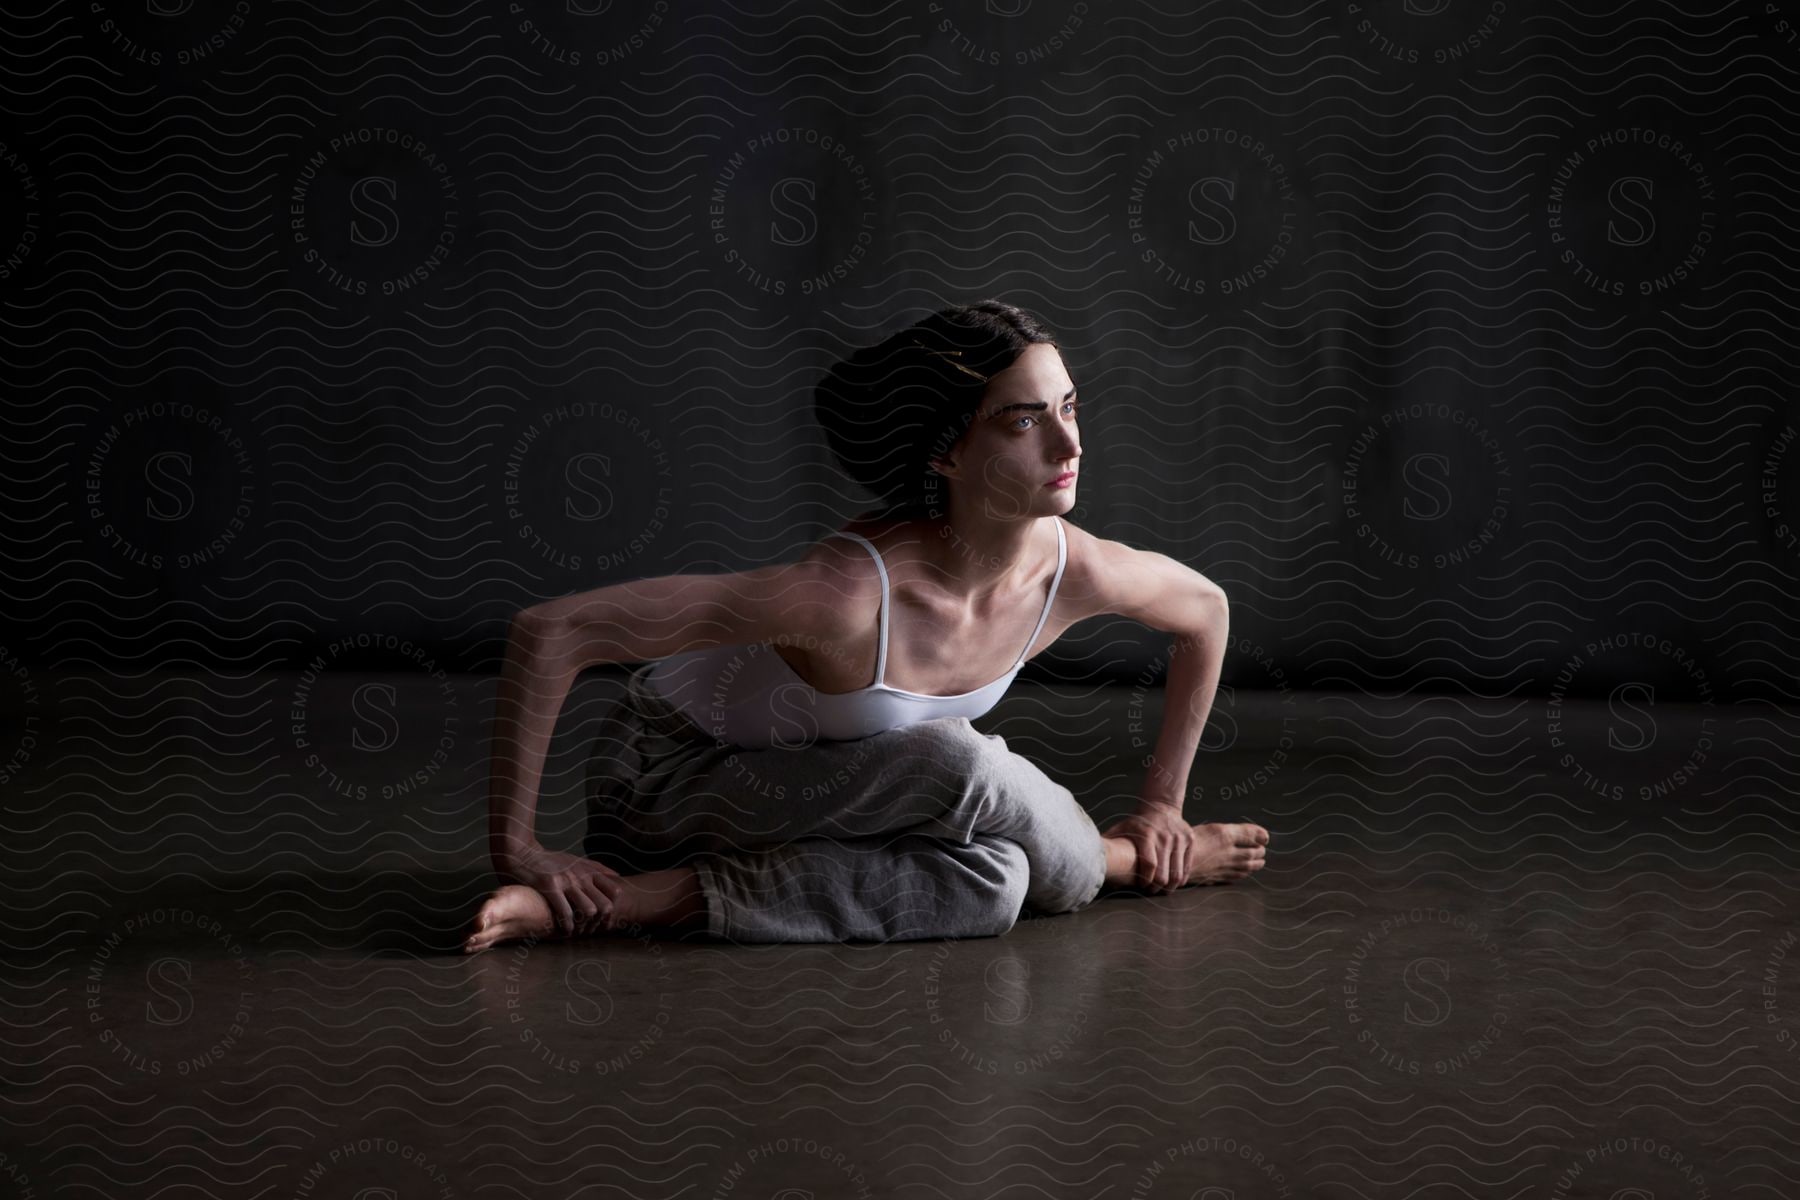 A woman dancer bending down with crossed legs